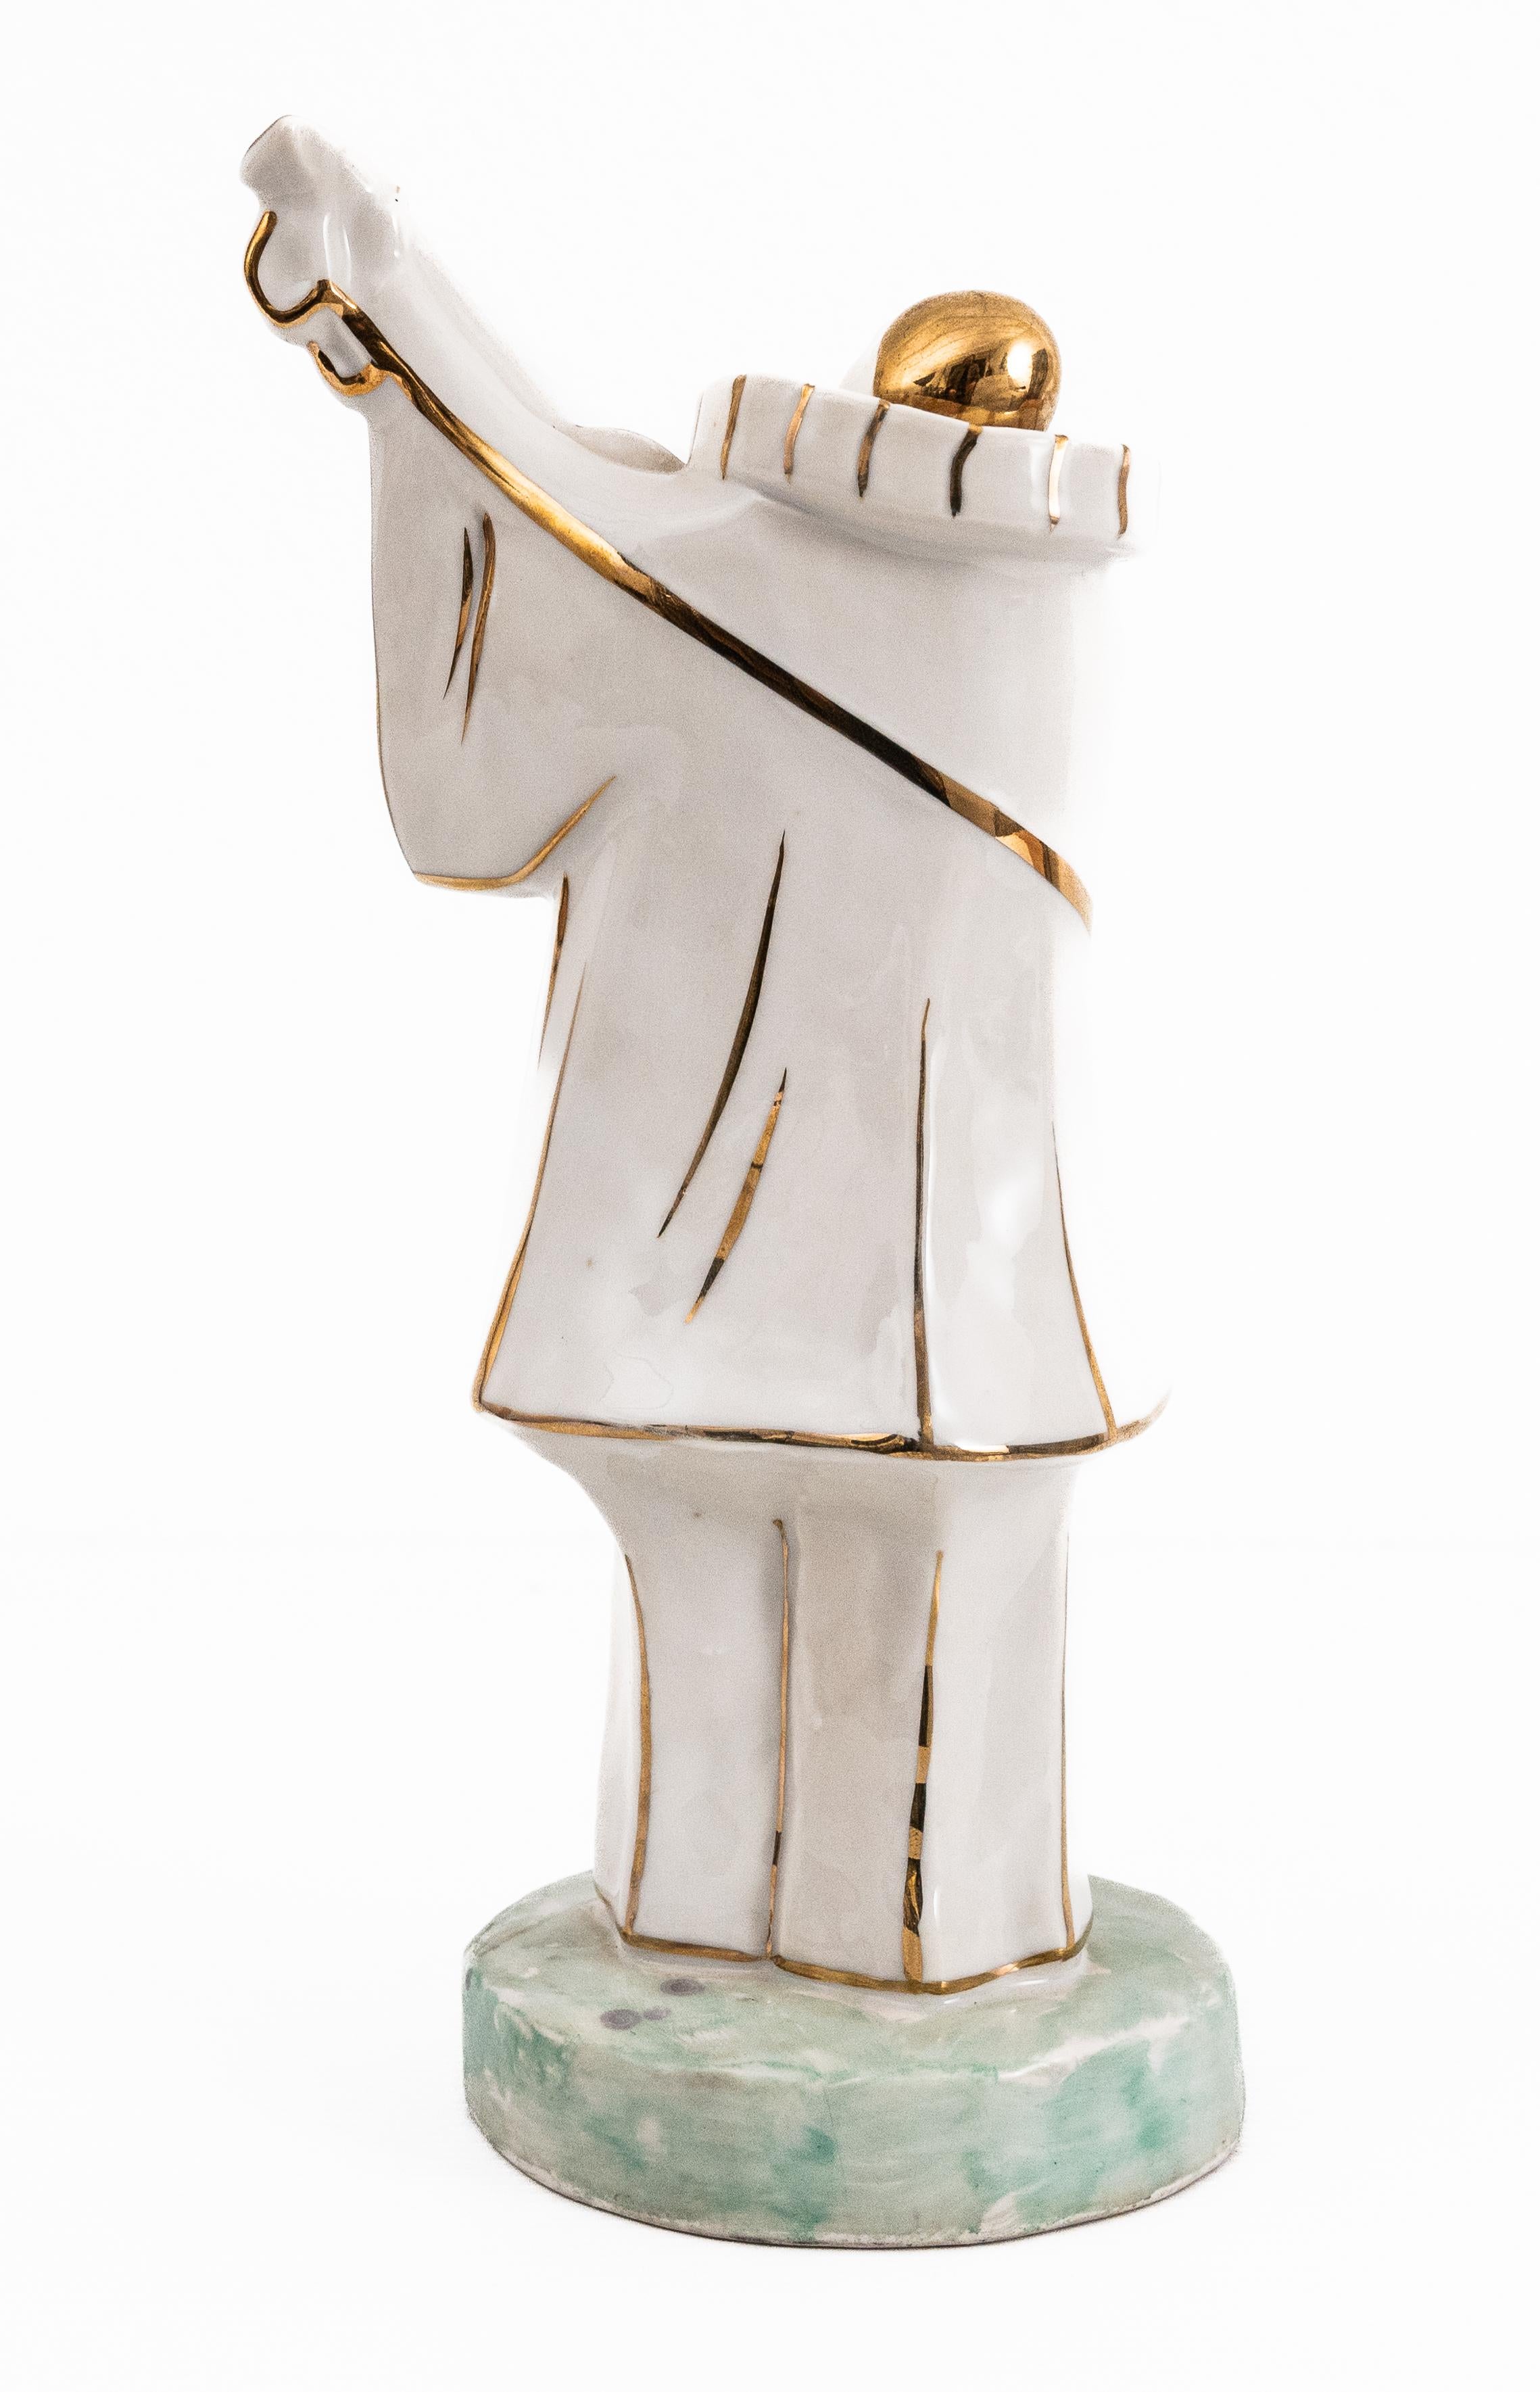 Limoges Porcelain Pierrot Musician in White and Gold by Edouard Marcel Sandoz For Sale 3